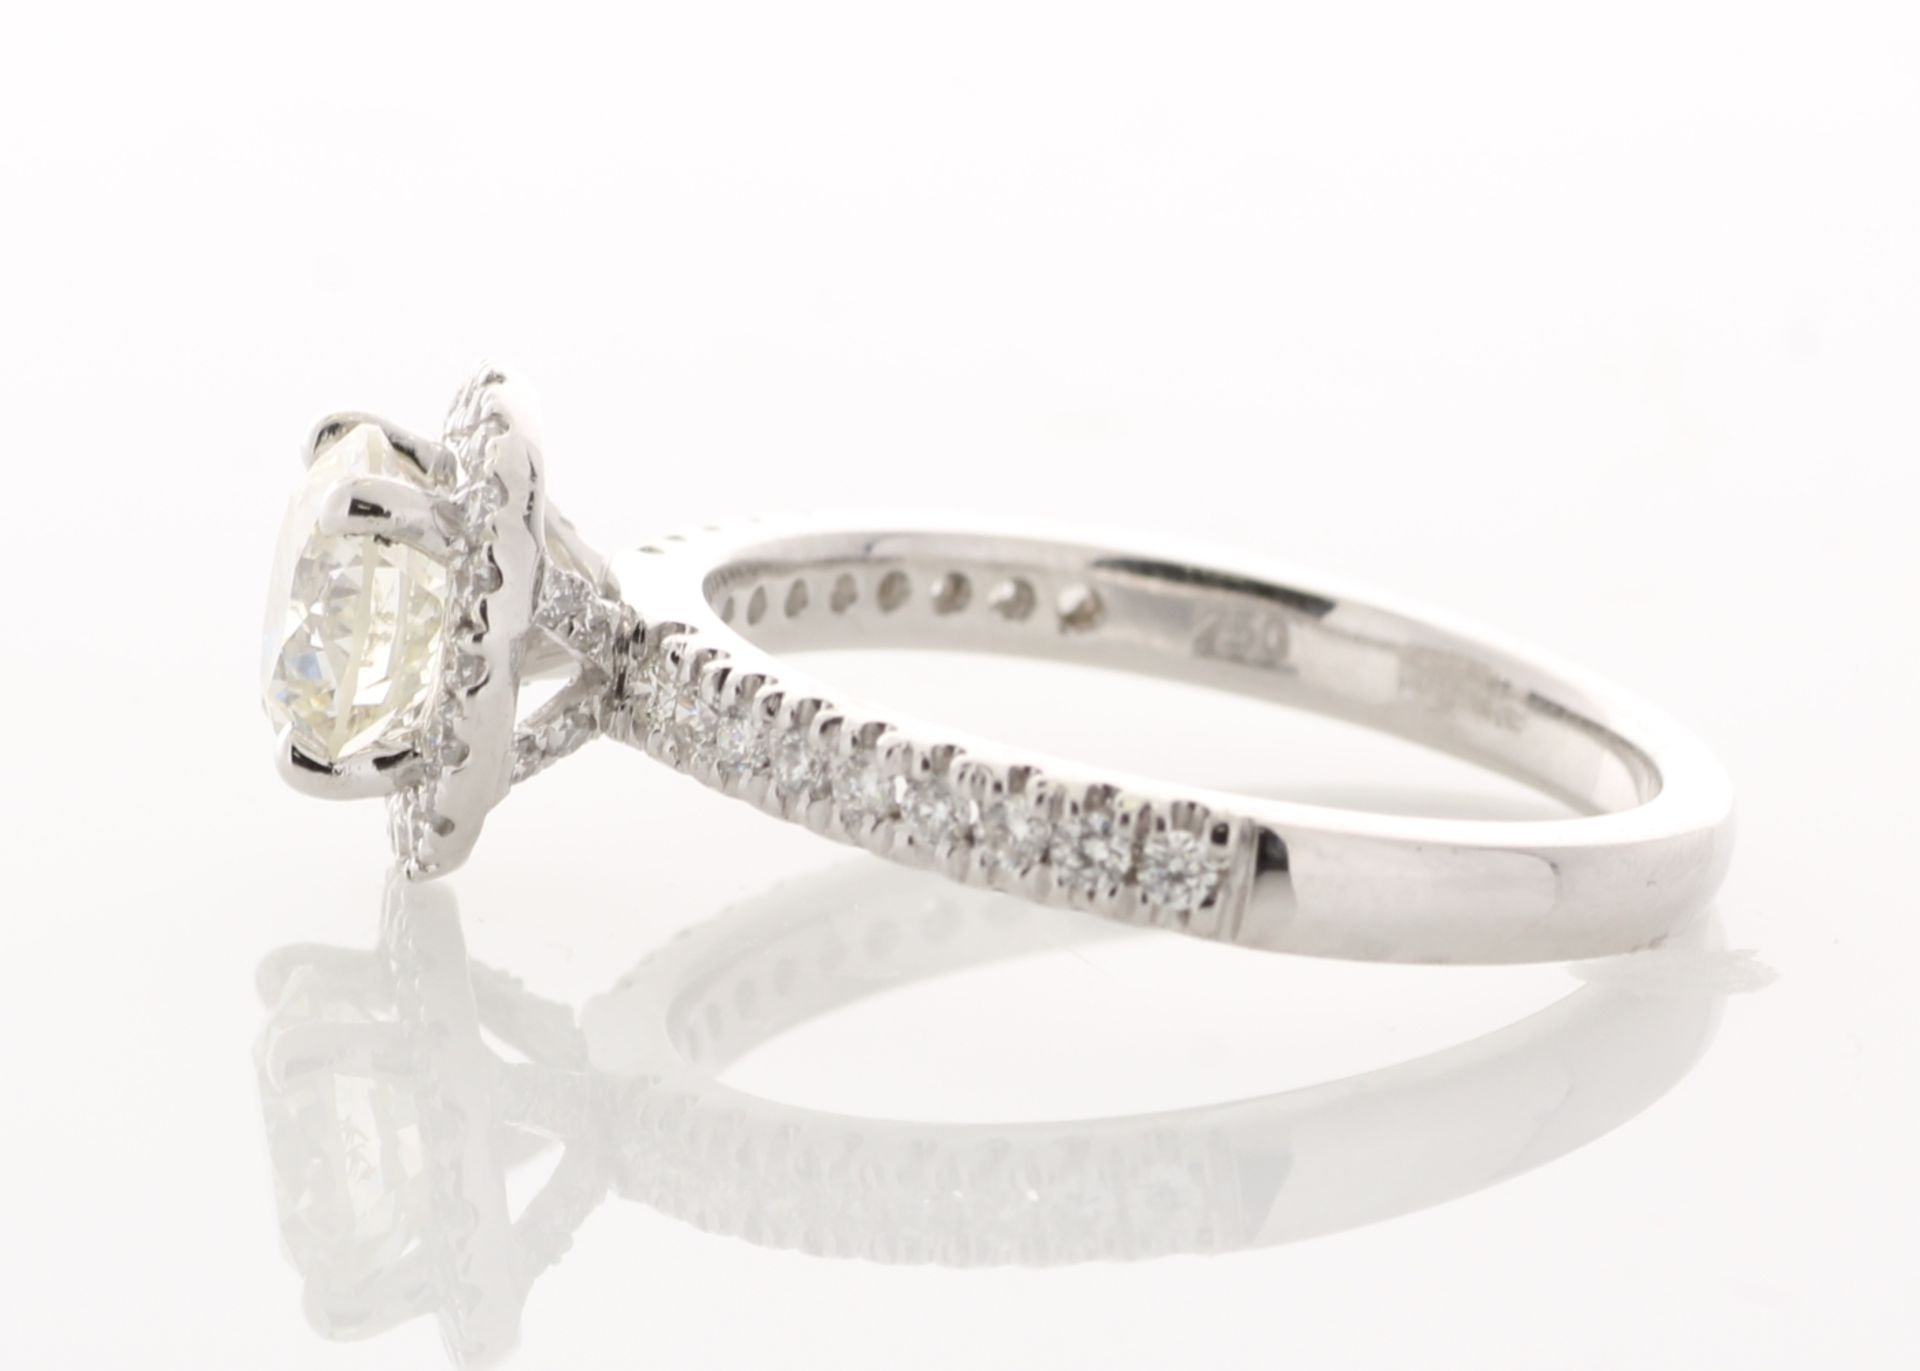 18ct White Gold Single Stone With Halo Setting Ring (1.01) 1.37 Carats - Valued by IDI £20,000. - Image 2 of 5